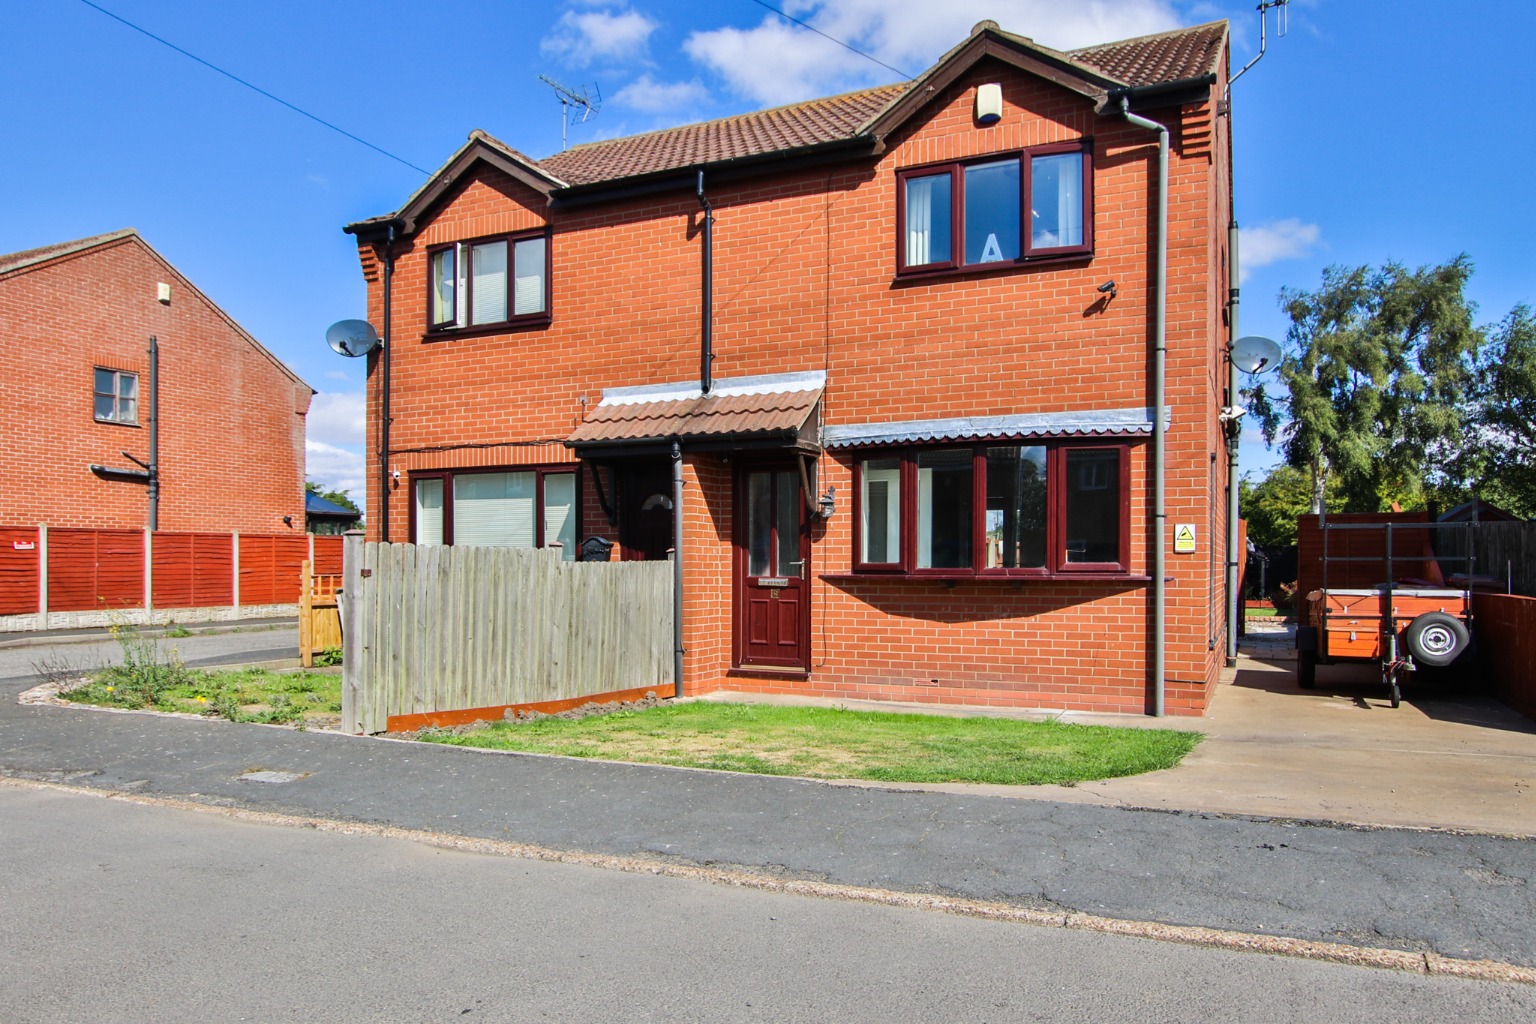 3 bed semi-detached house for sale in Oxmarsh Lane, Barrow upon Humber, DN19